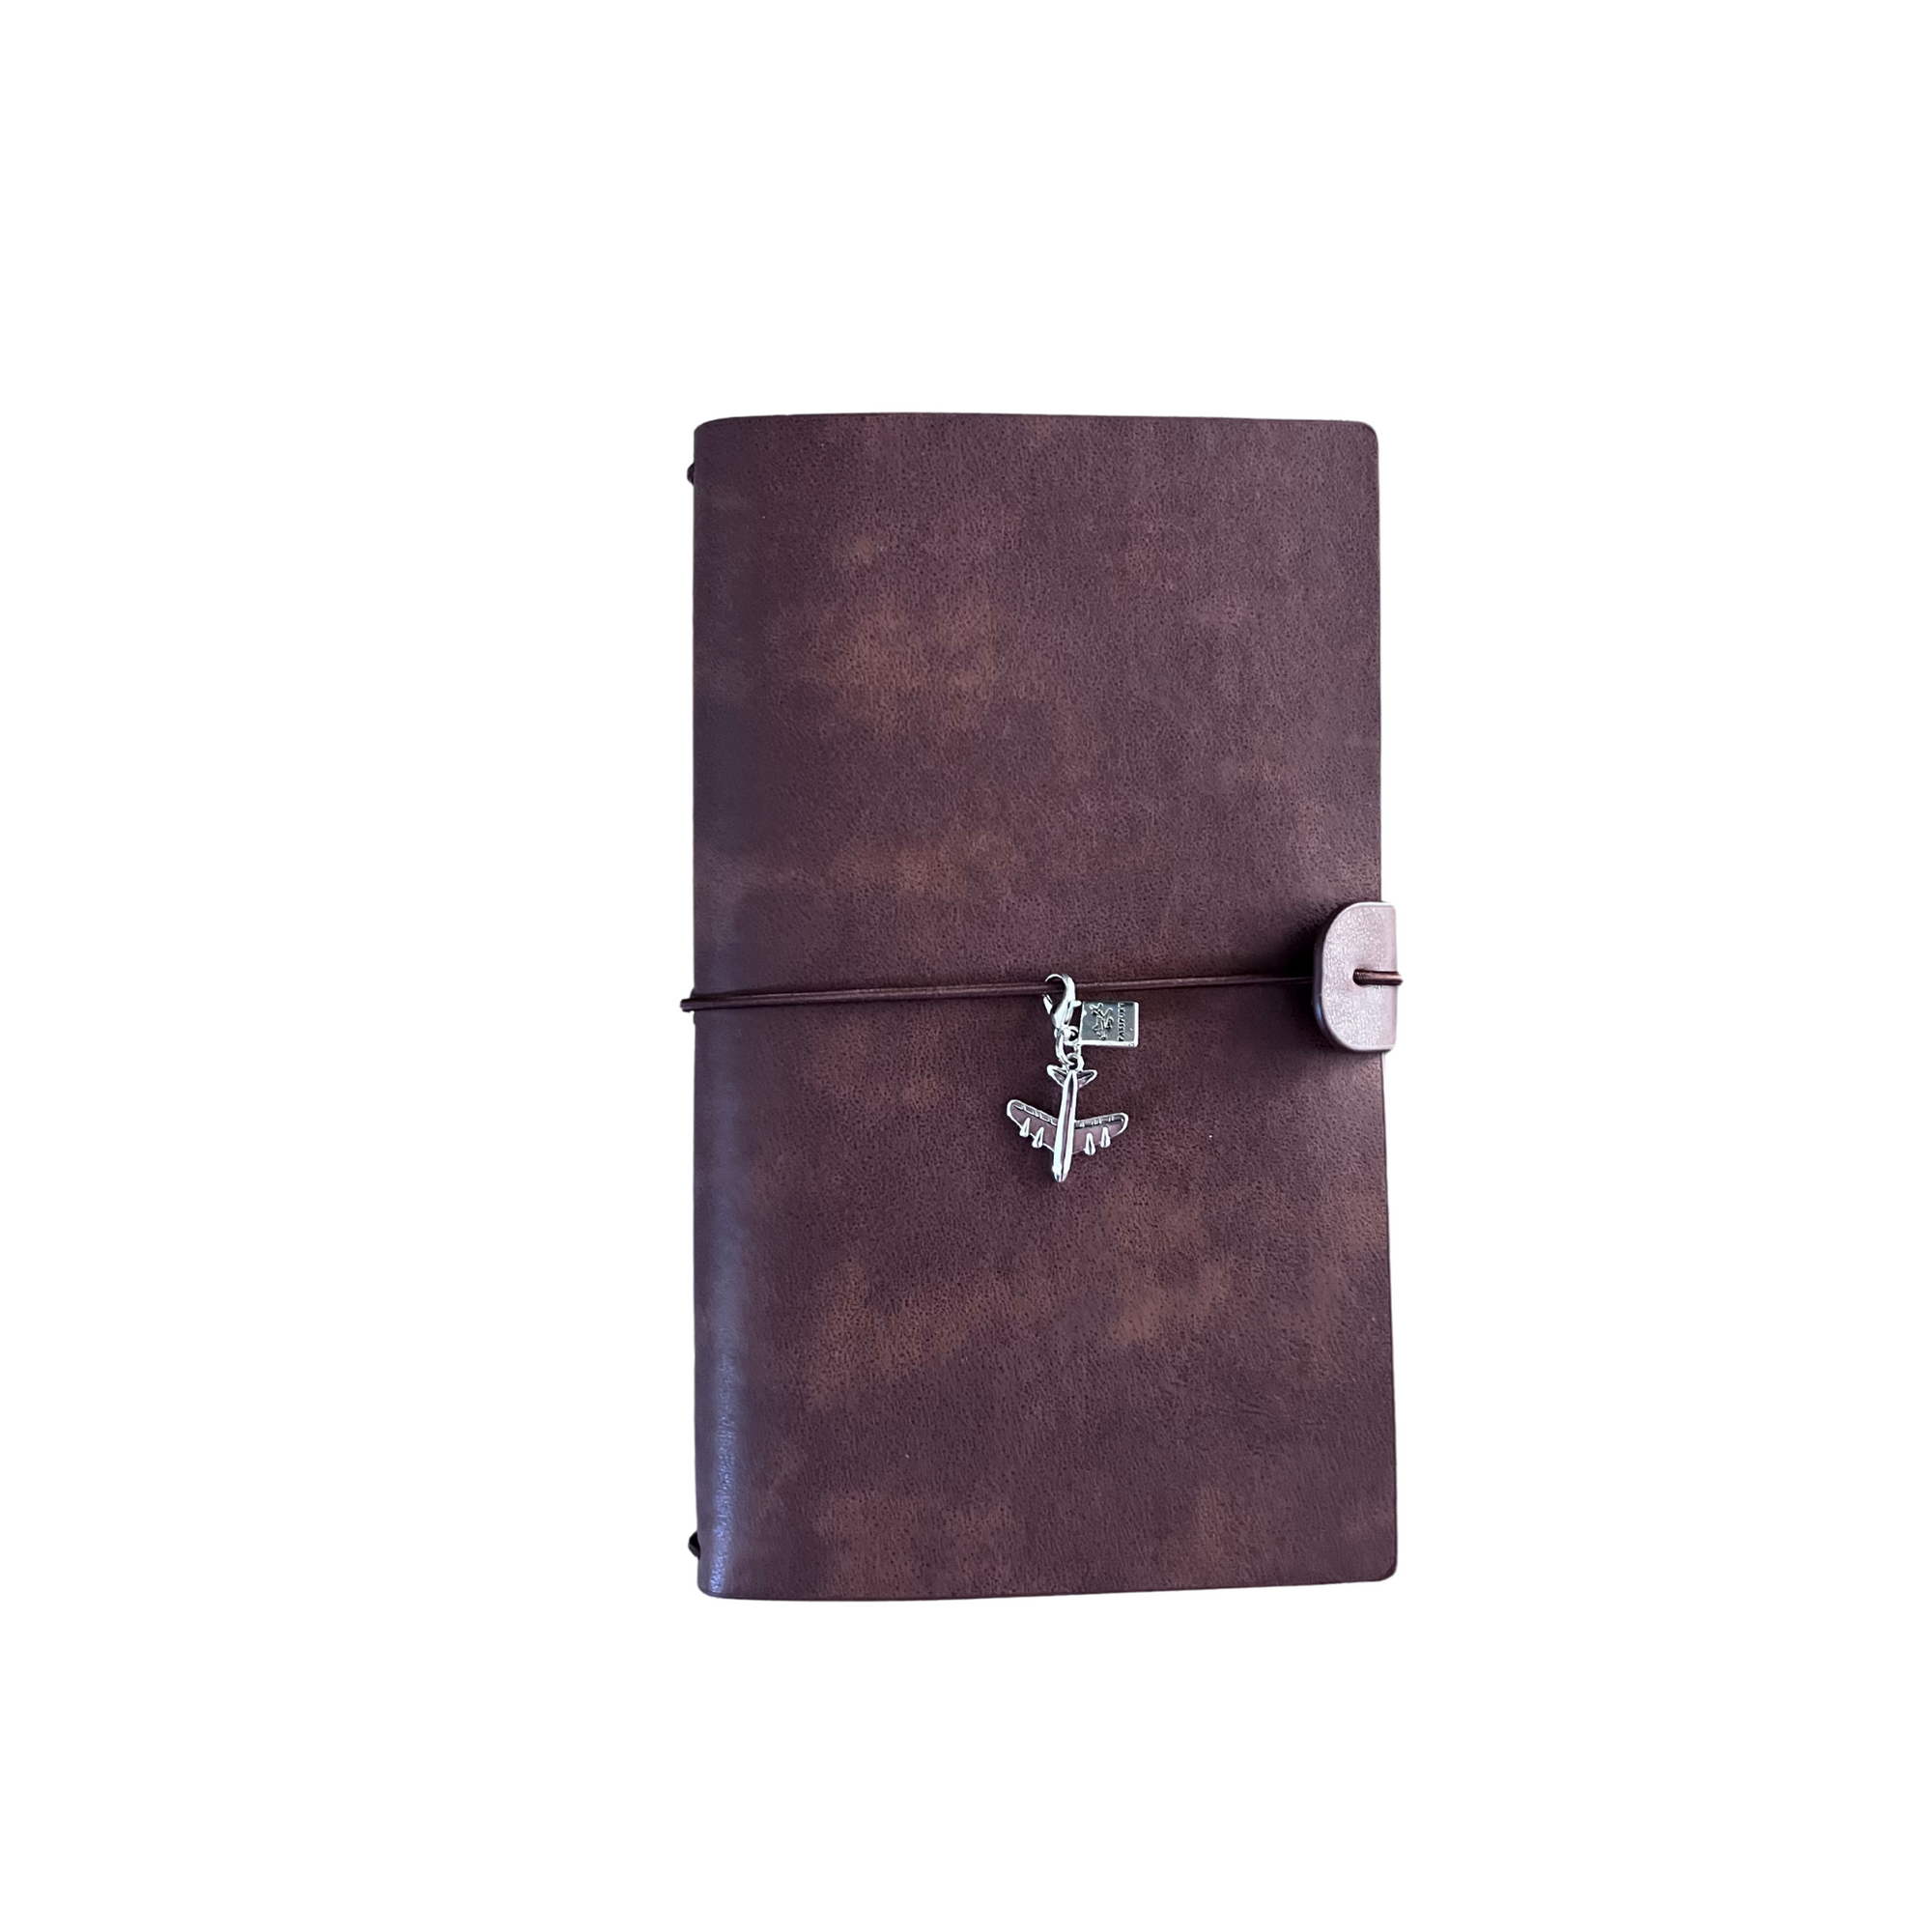 Vegan leather Traveler's Notebook Collection